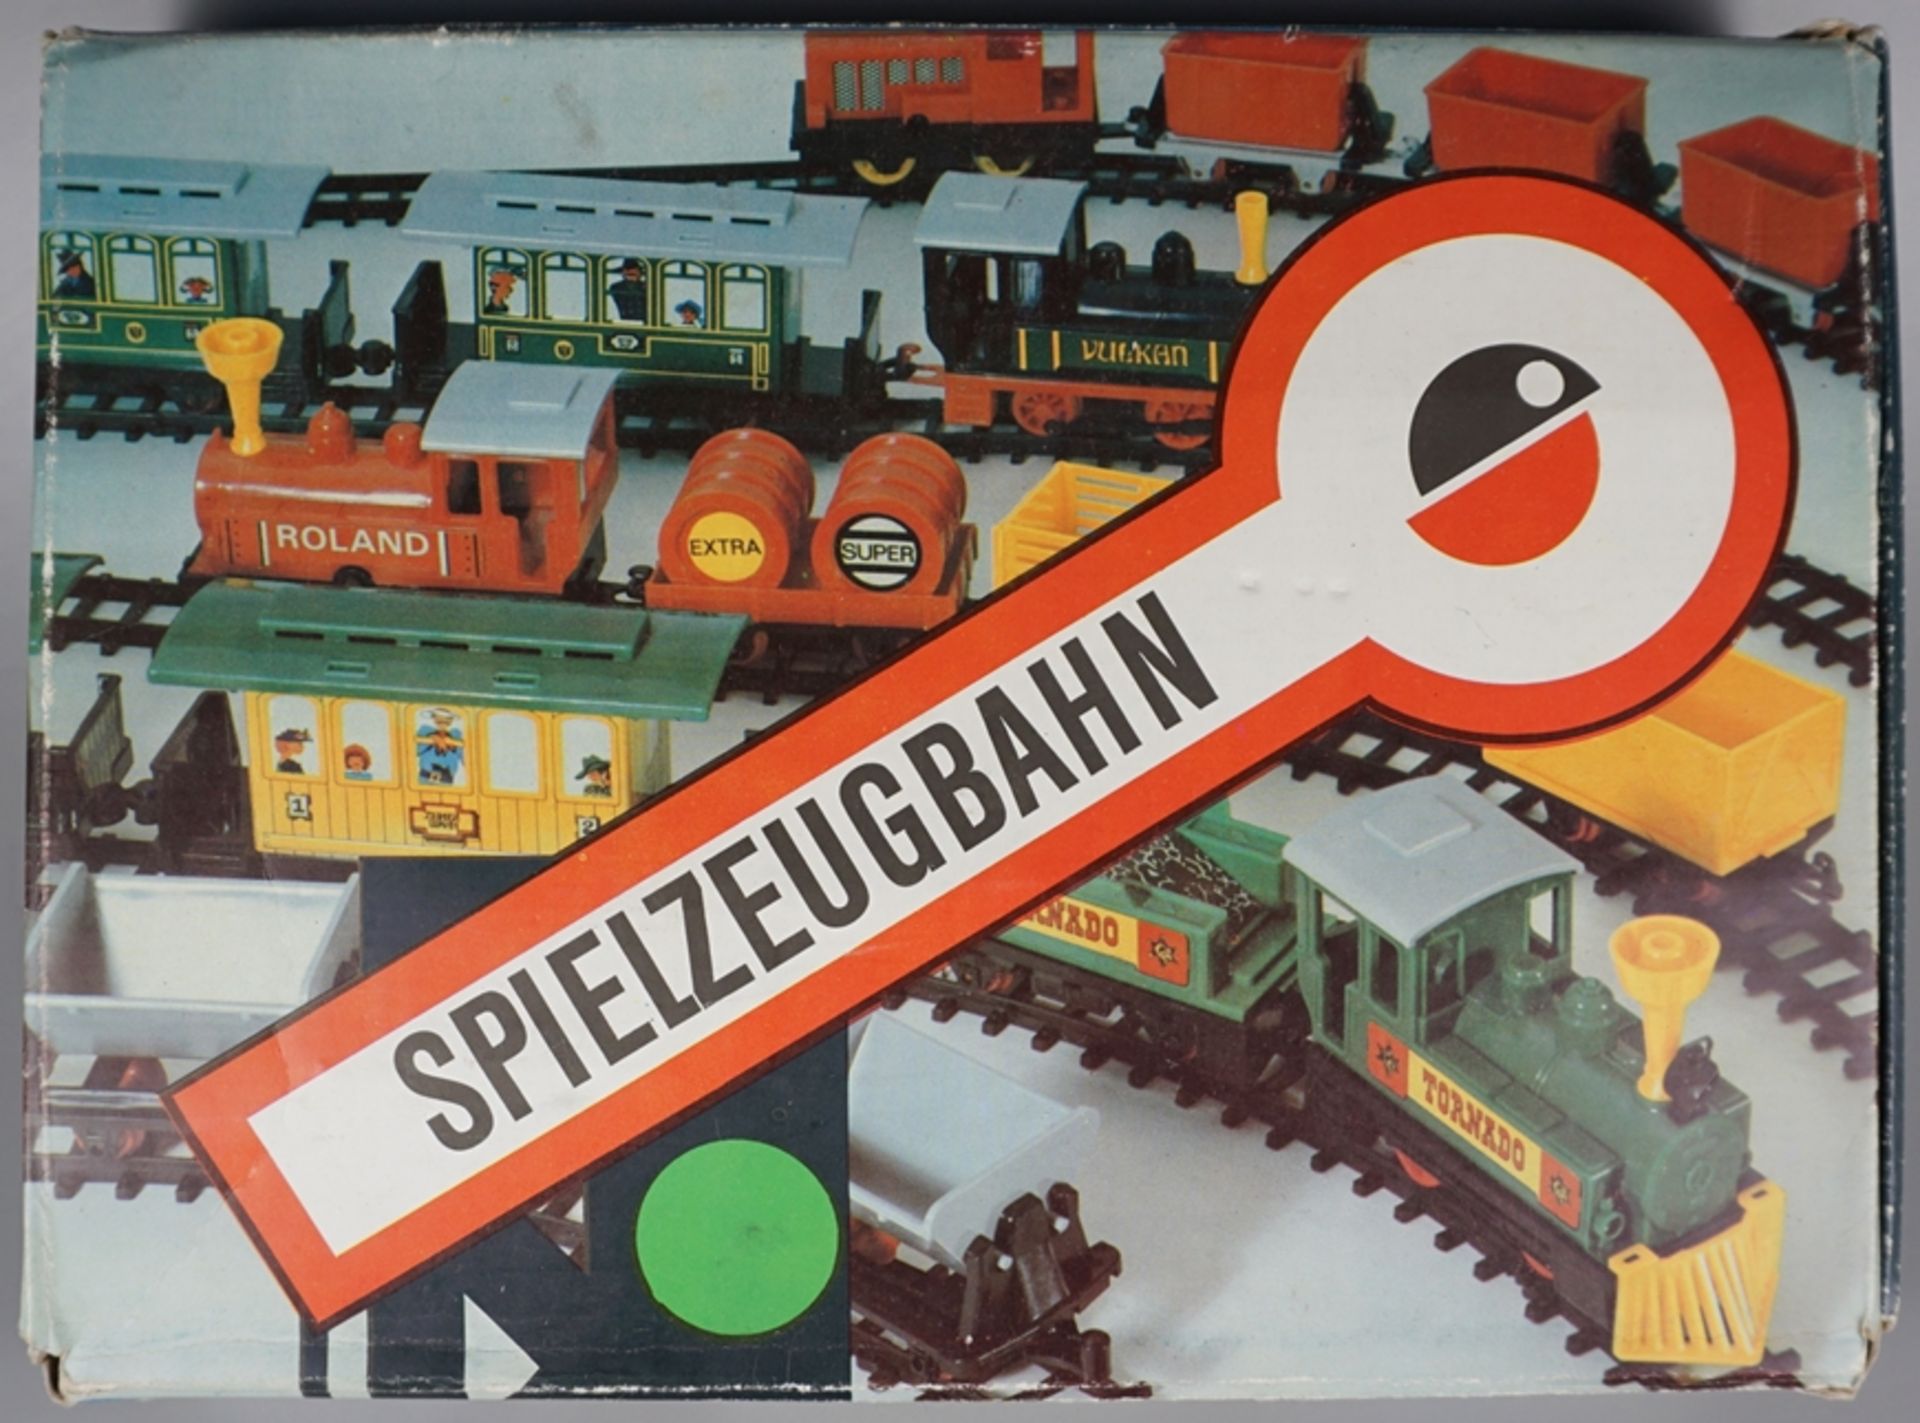 Railway "Tornado" with rails, GDR, lithographed sheet metal/plastic, in original packing